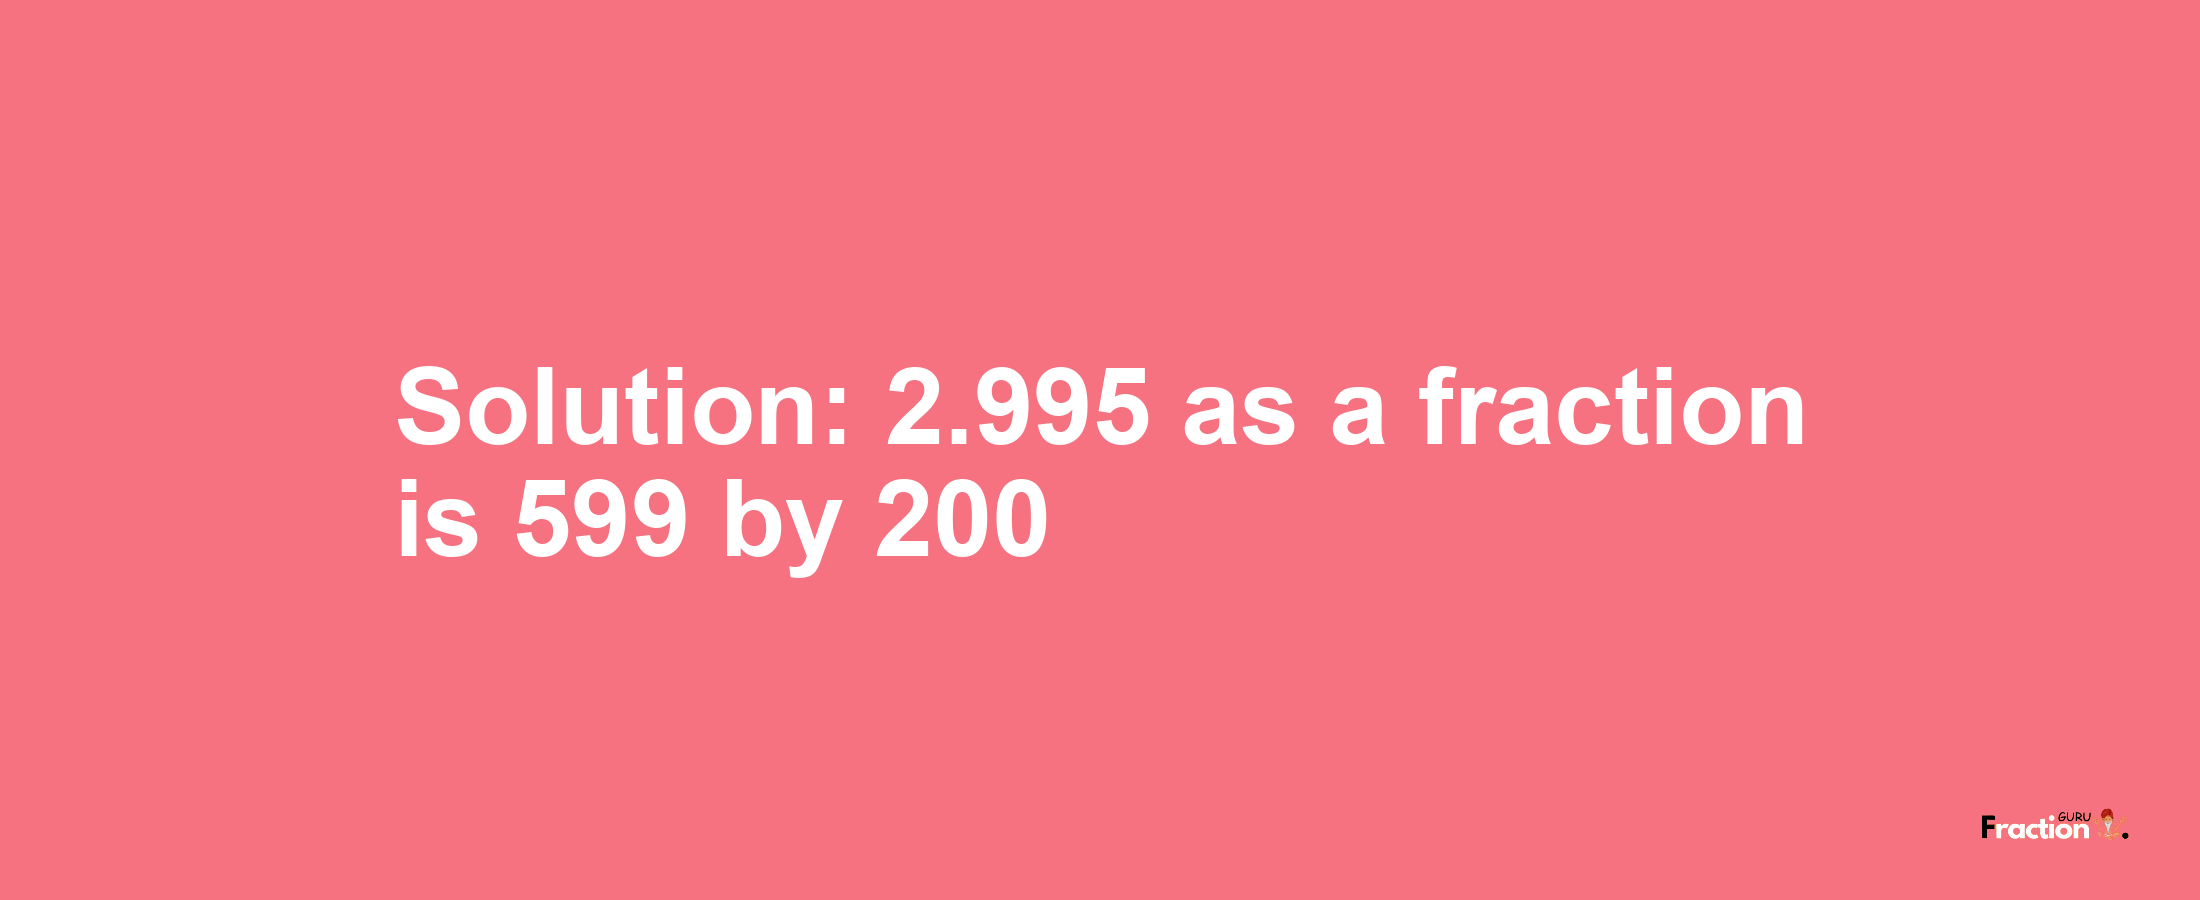 Solution:2.995 as a fraction is 599/200